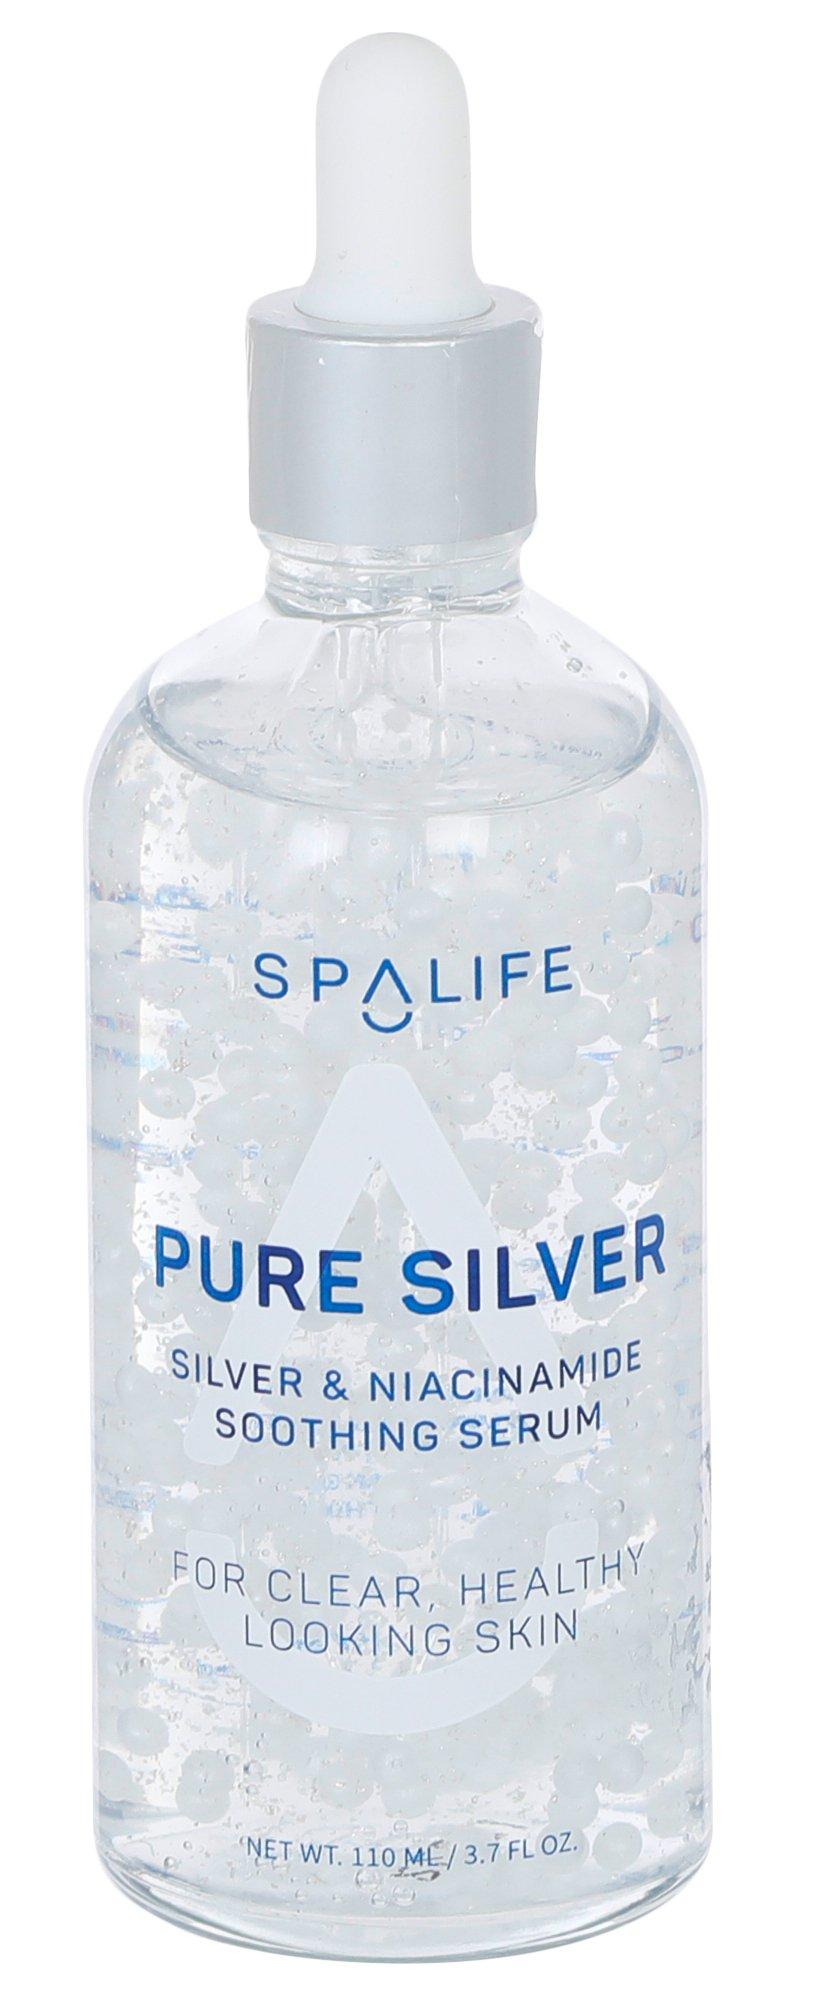 Pure Silver and Niacinamide Soothing Serum